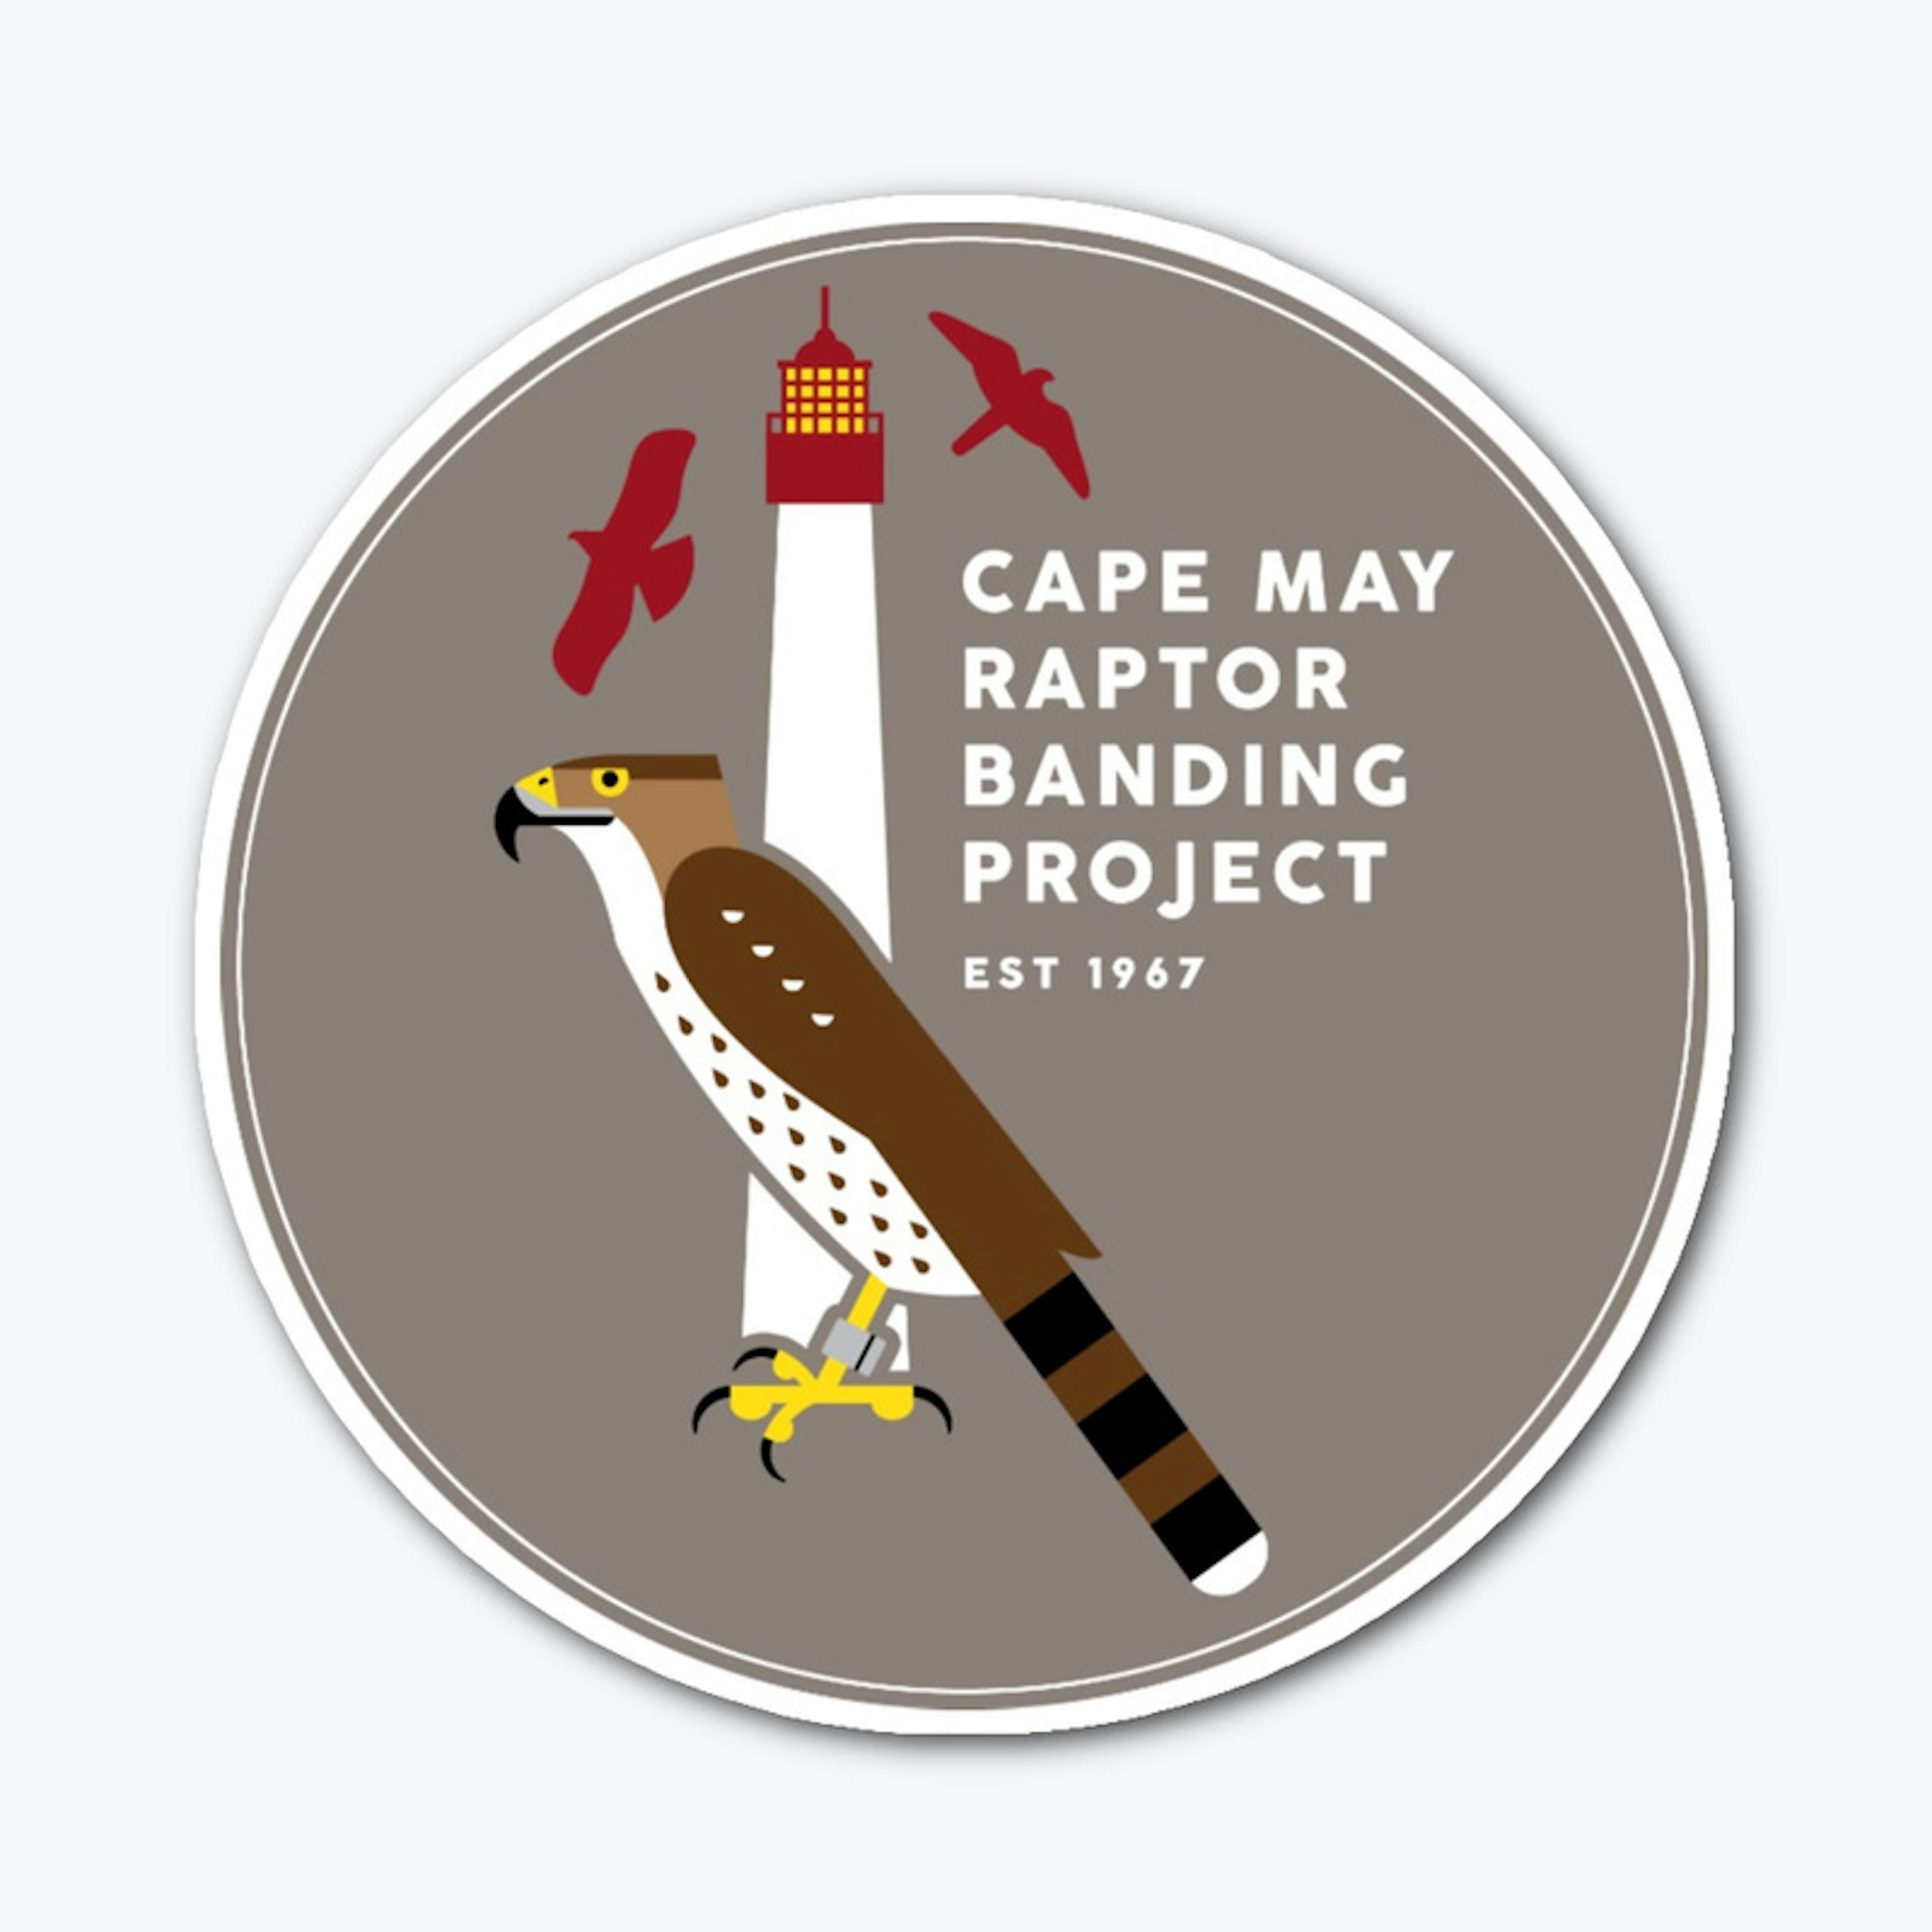 Cape May Raptor Banding Project